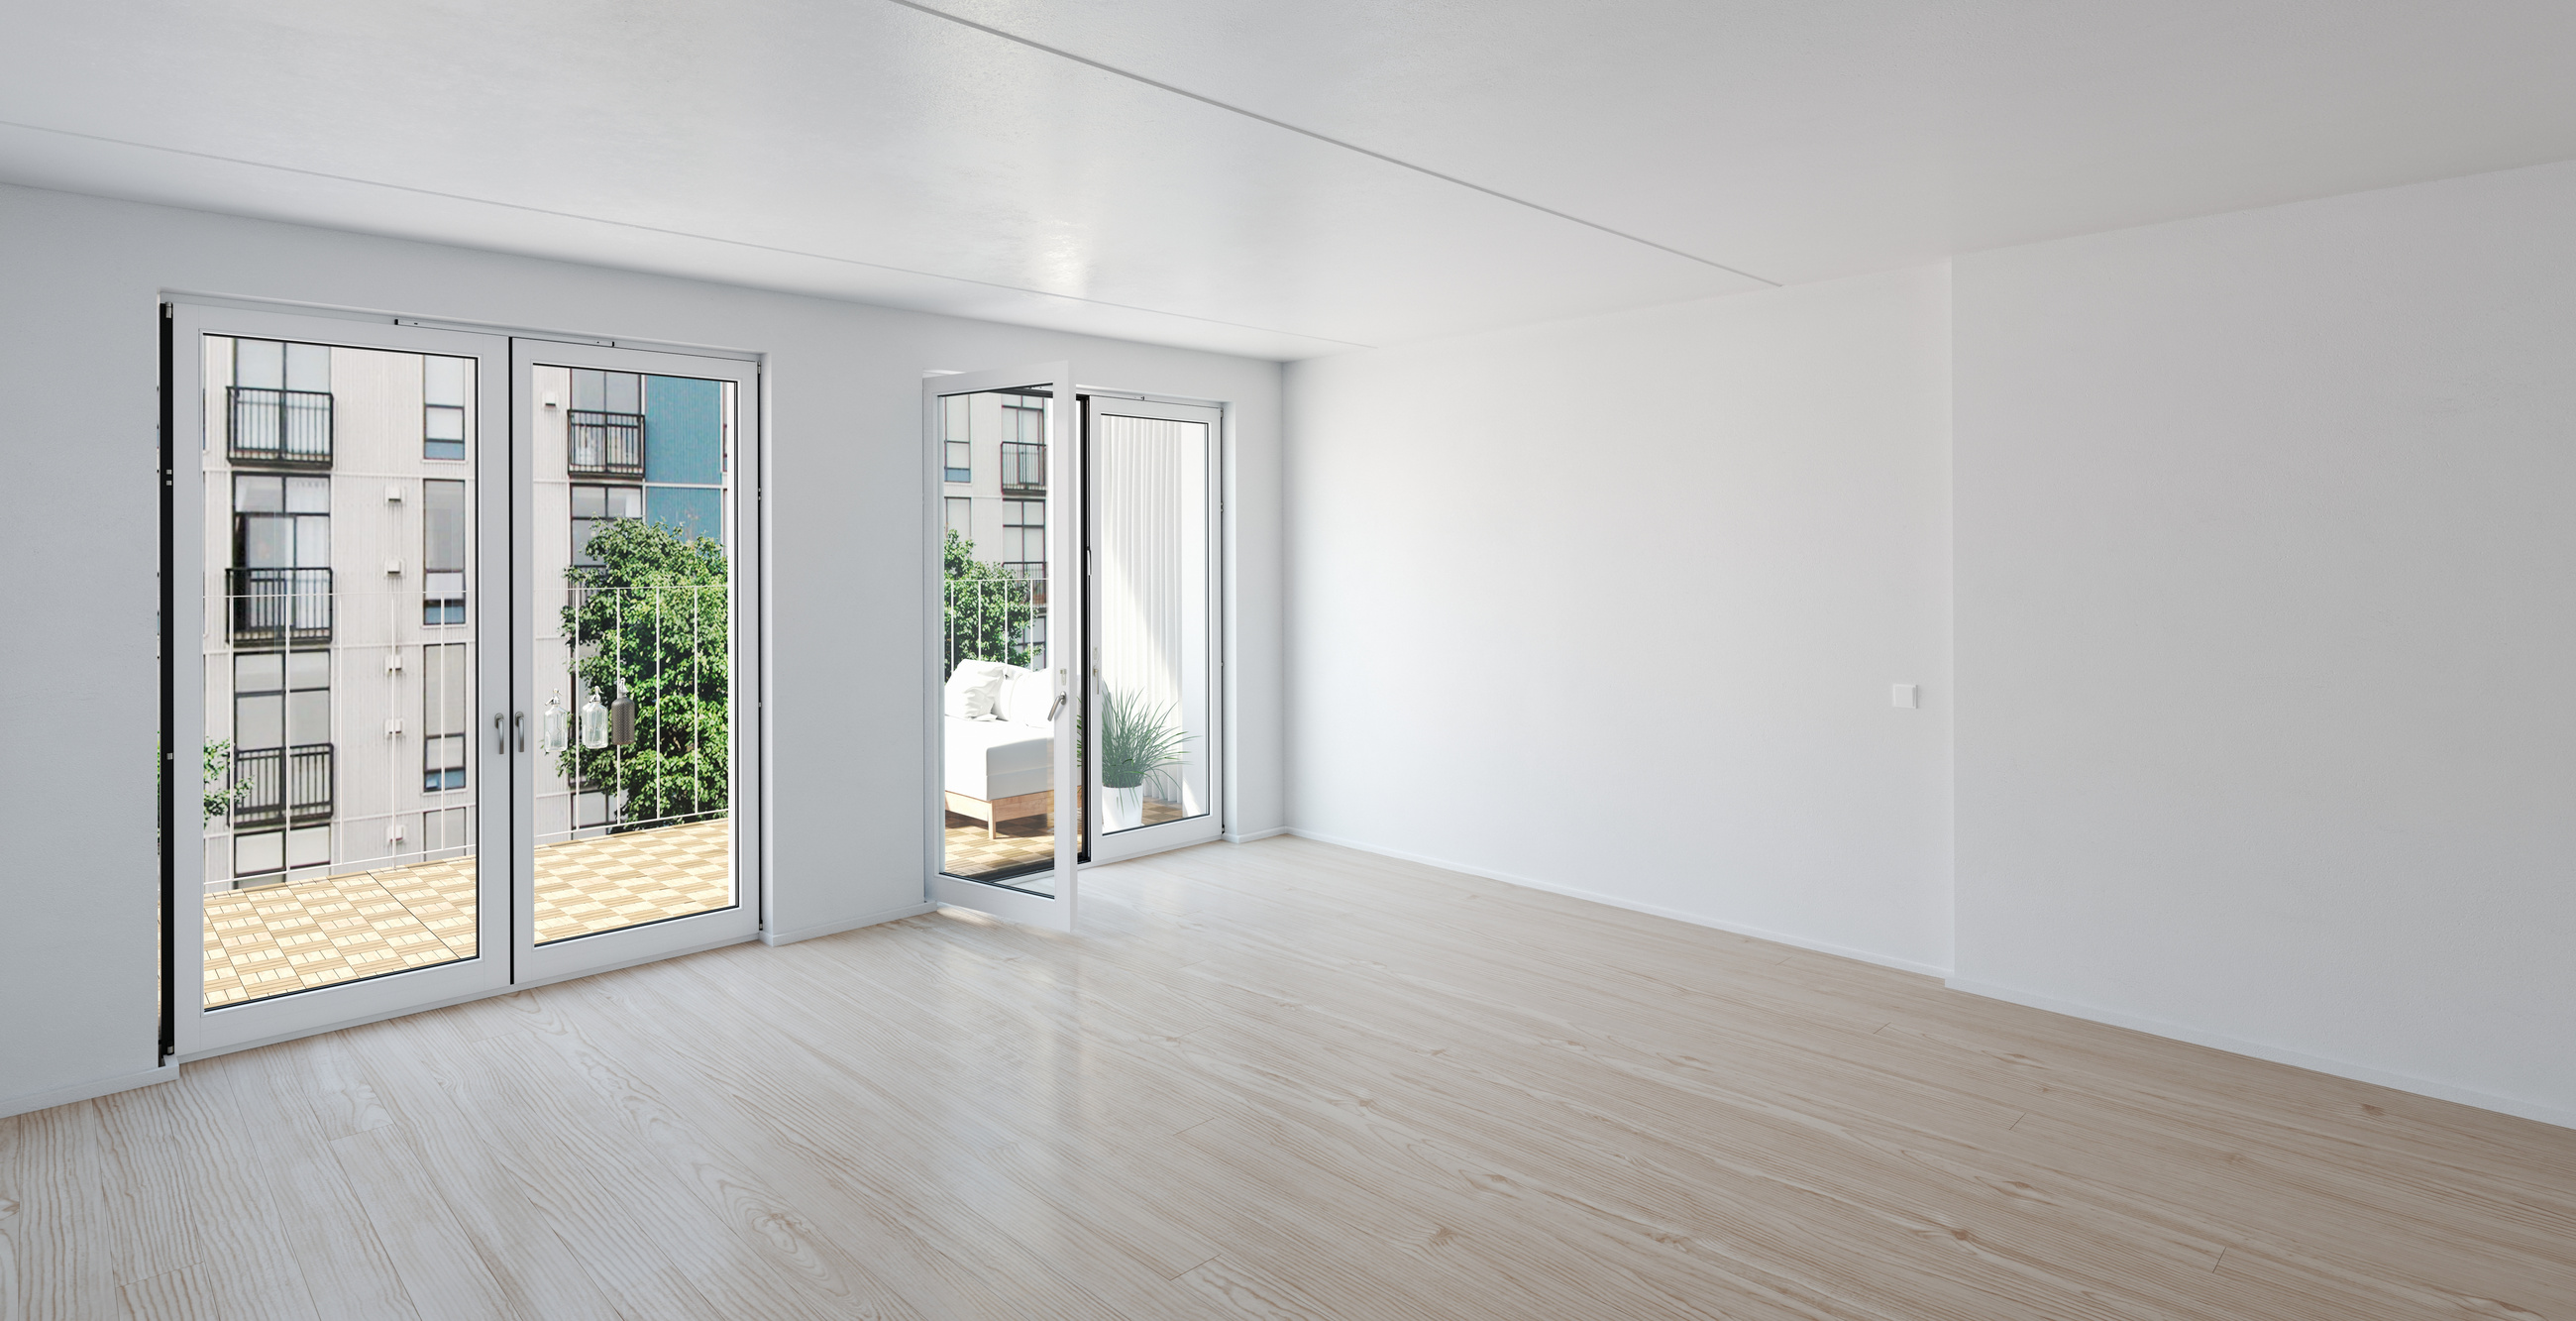 Unfurnished Room with Glass Balcony Door